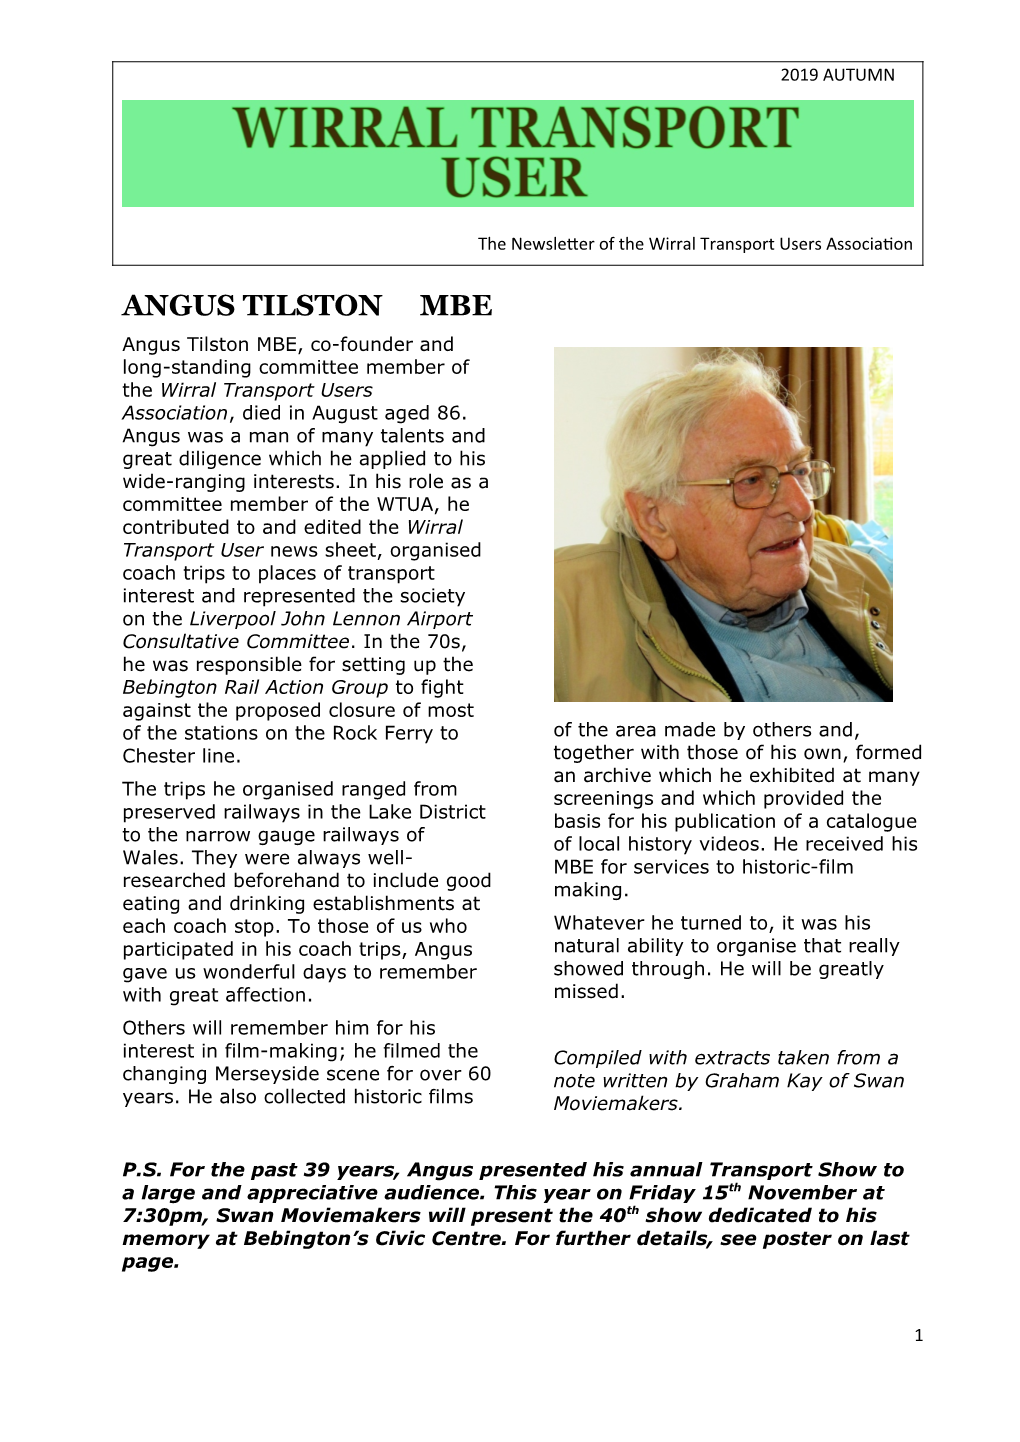 ANGUS TILSTON MBE Angus Tilston MBE, Co-Founder and Long-Standing Committee Member of the Wirral Transport Users Association, Died in August Aged 86